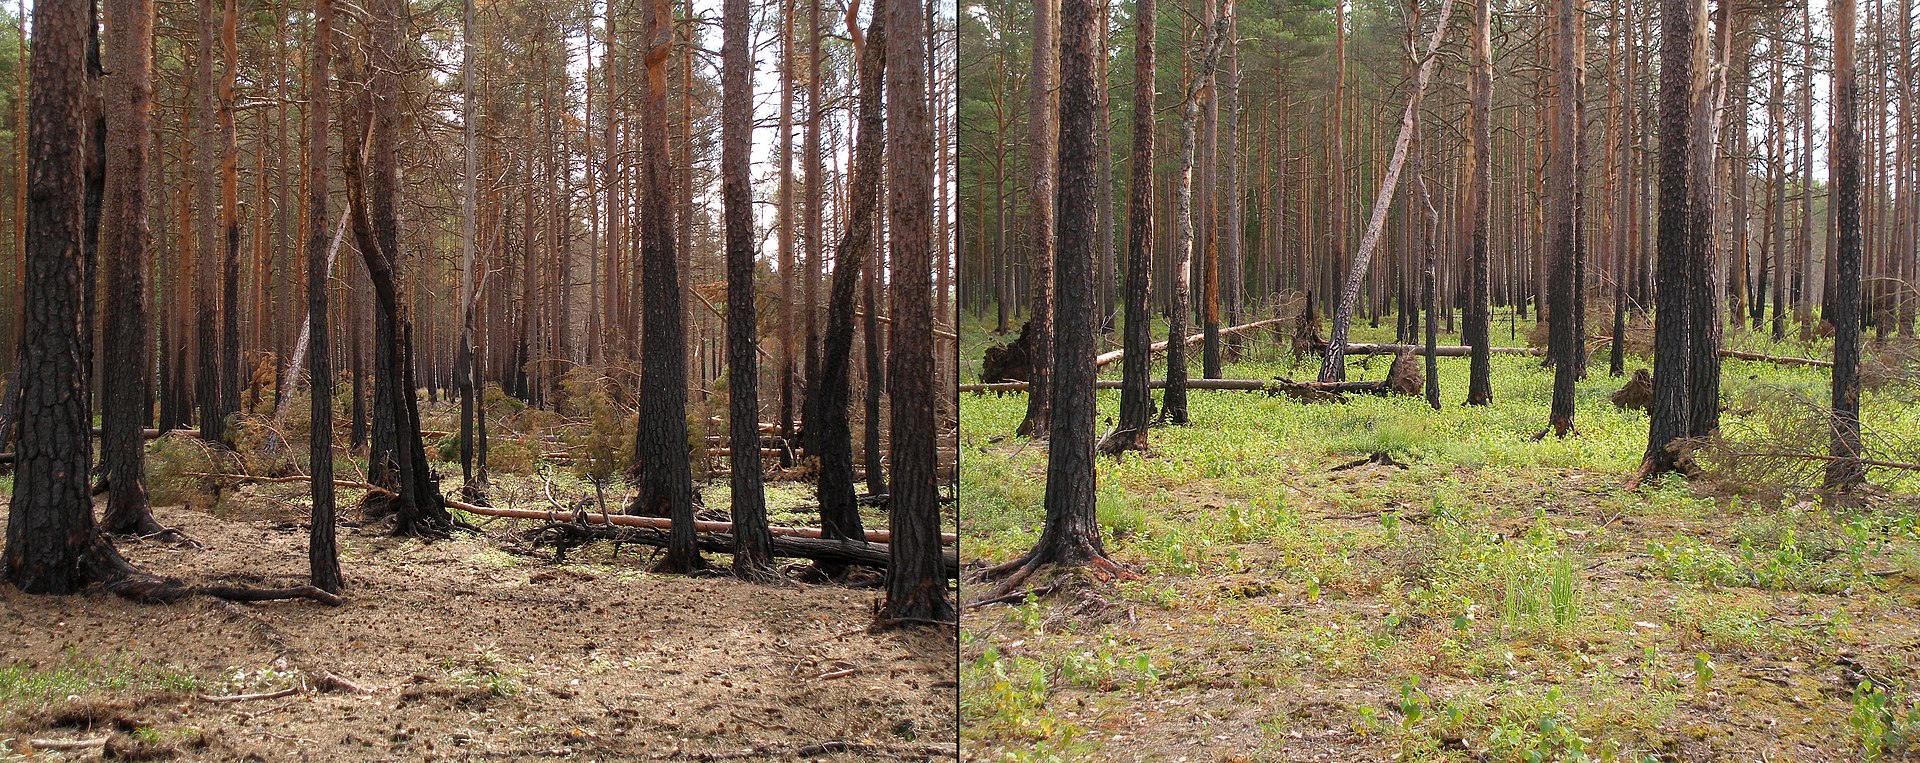 1920px-Boreal_pine_forest_after_fire.JPG